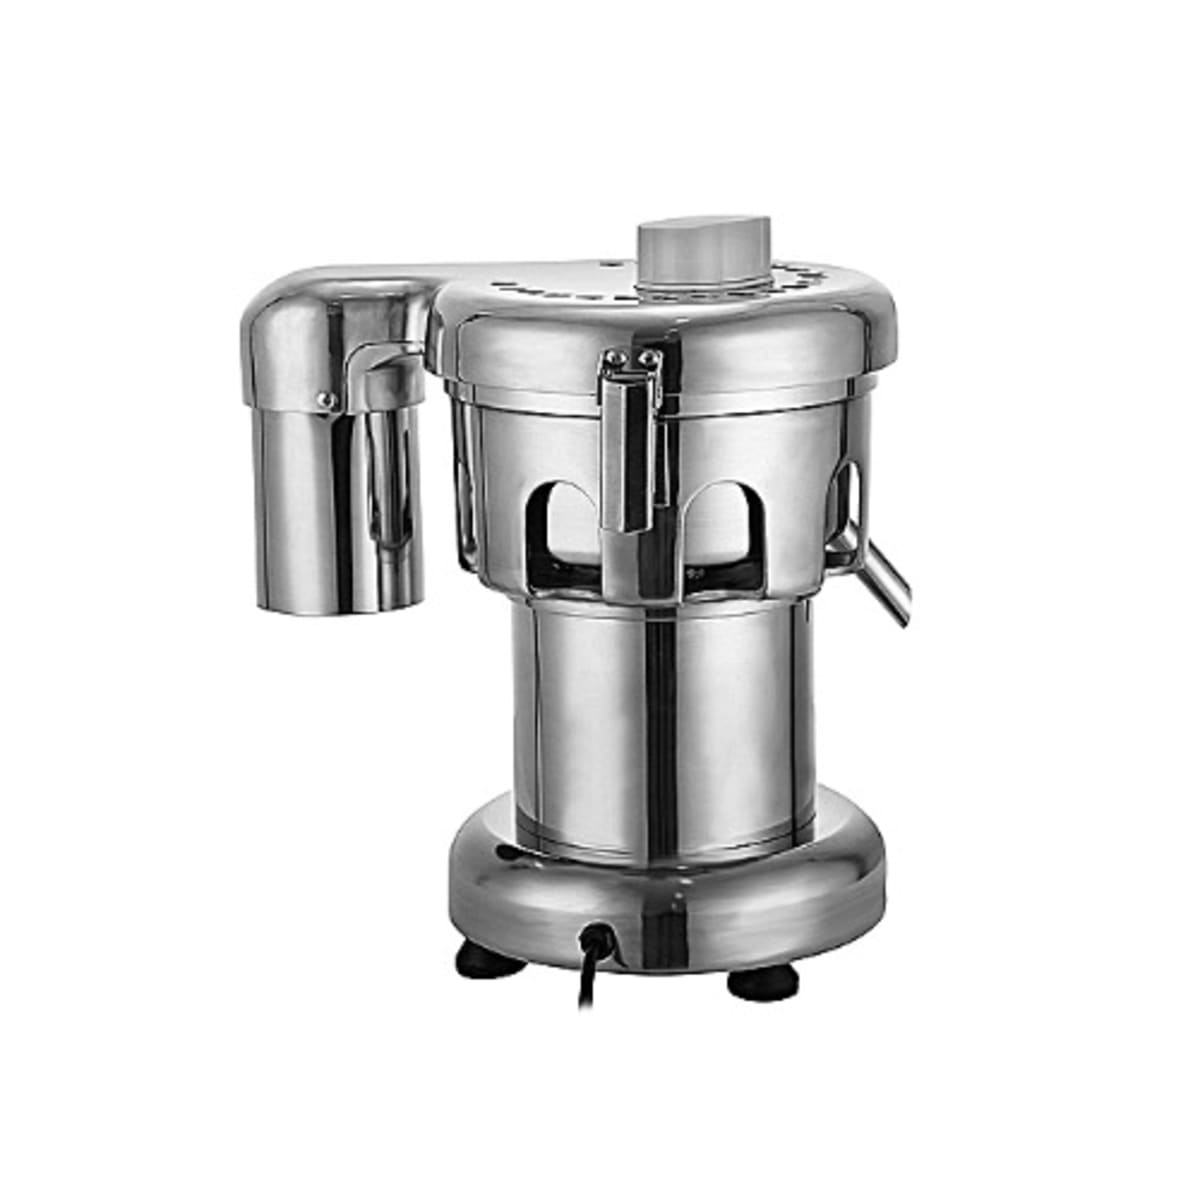  Commercial Juice Extractor, 370W Juicer Machine, Fruit and  Vegetables Juice Maker, Commercial Juice Extractor Stainless Steel Heavy  Duty, 2800r/min: Home & Kitchen